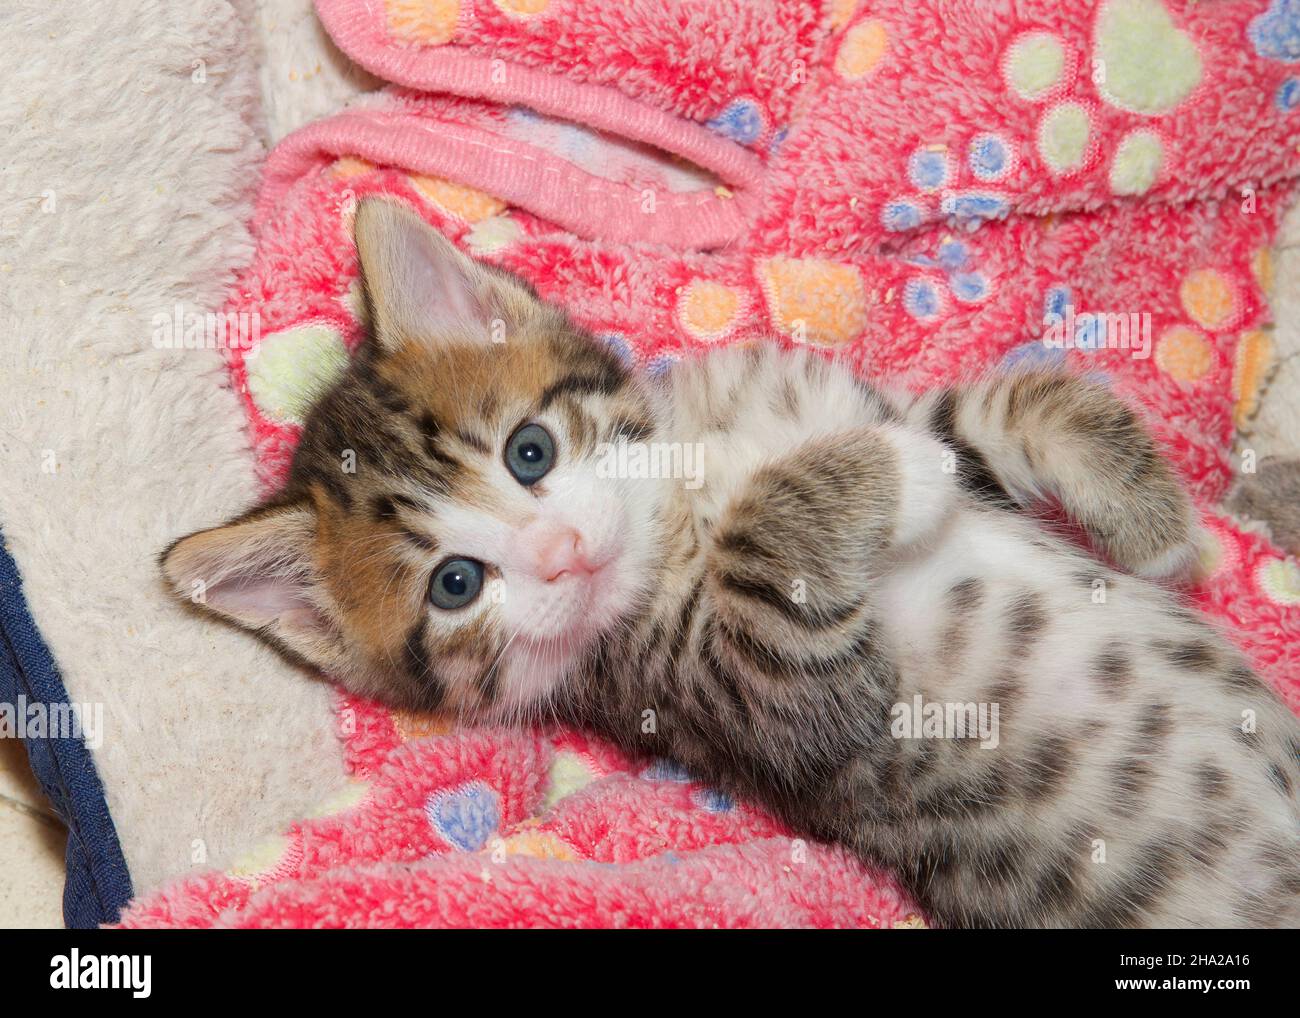 Top view looking down on tiny kitten laying on pink blanket with paw print pattern, looking up at viewer with paws tucked in on tummy. Stock Photo